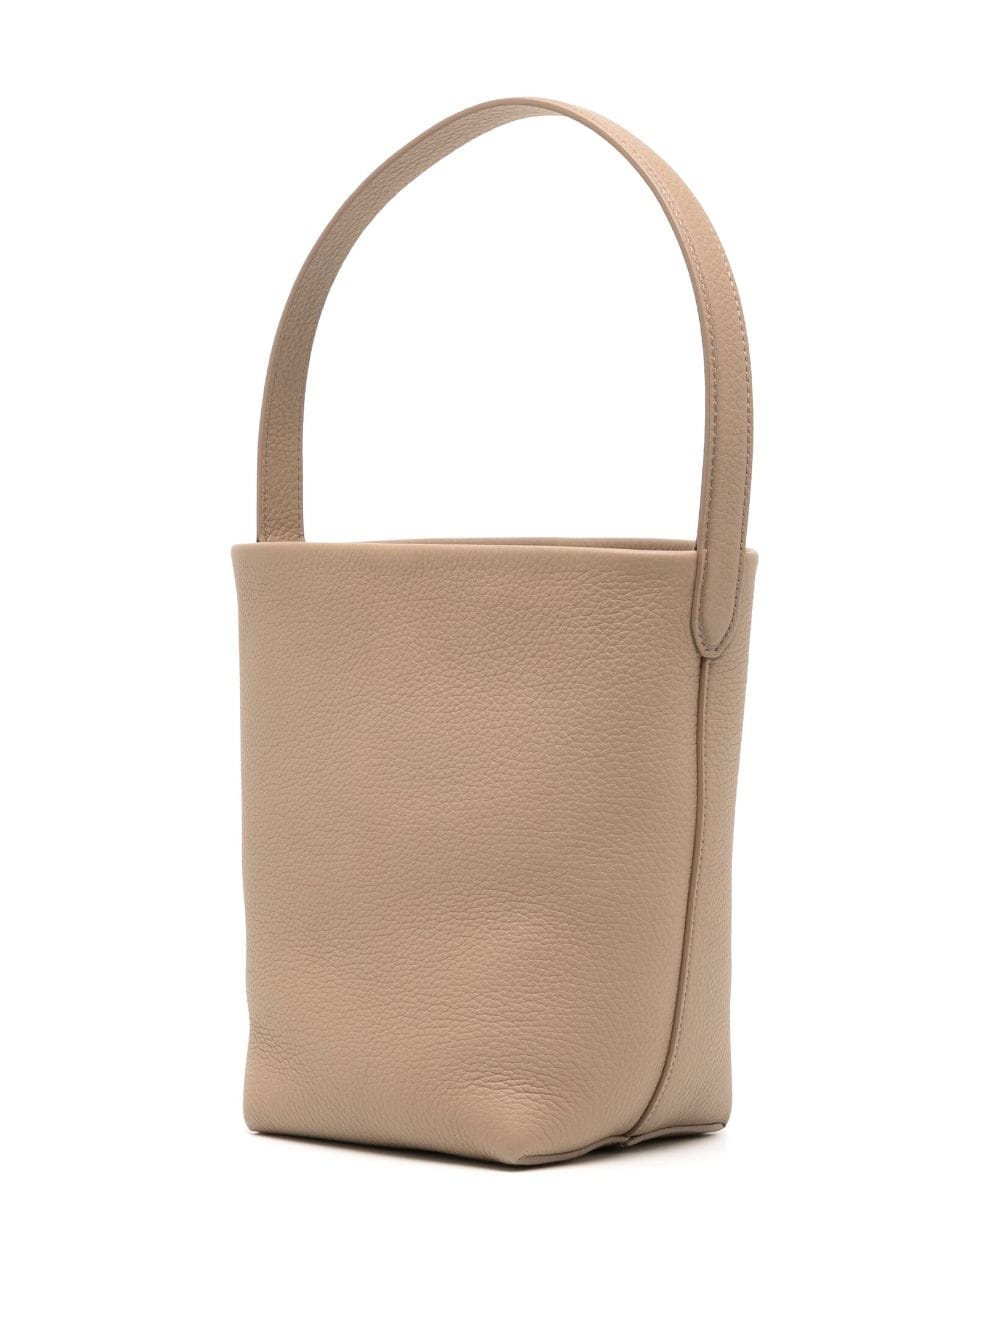 Shop The Row The Row Park Tote Small N/S Park Tote in Leather by